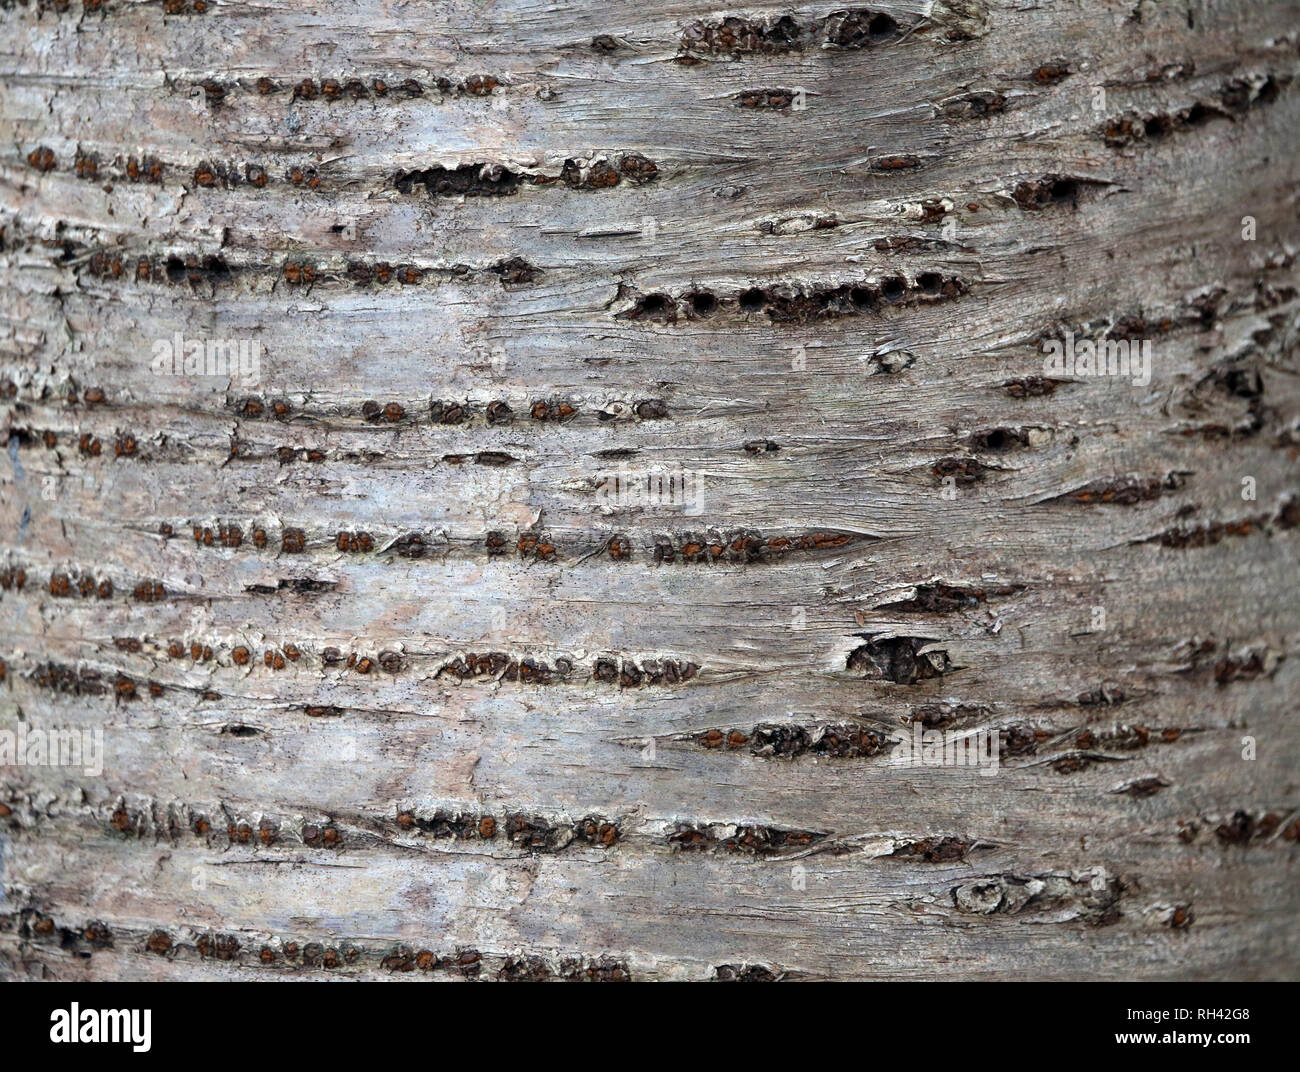 texture and pattern of tree bark Stock Photo